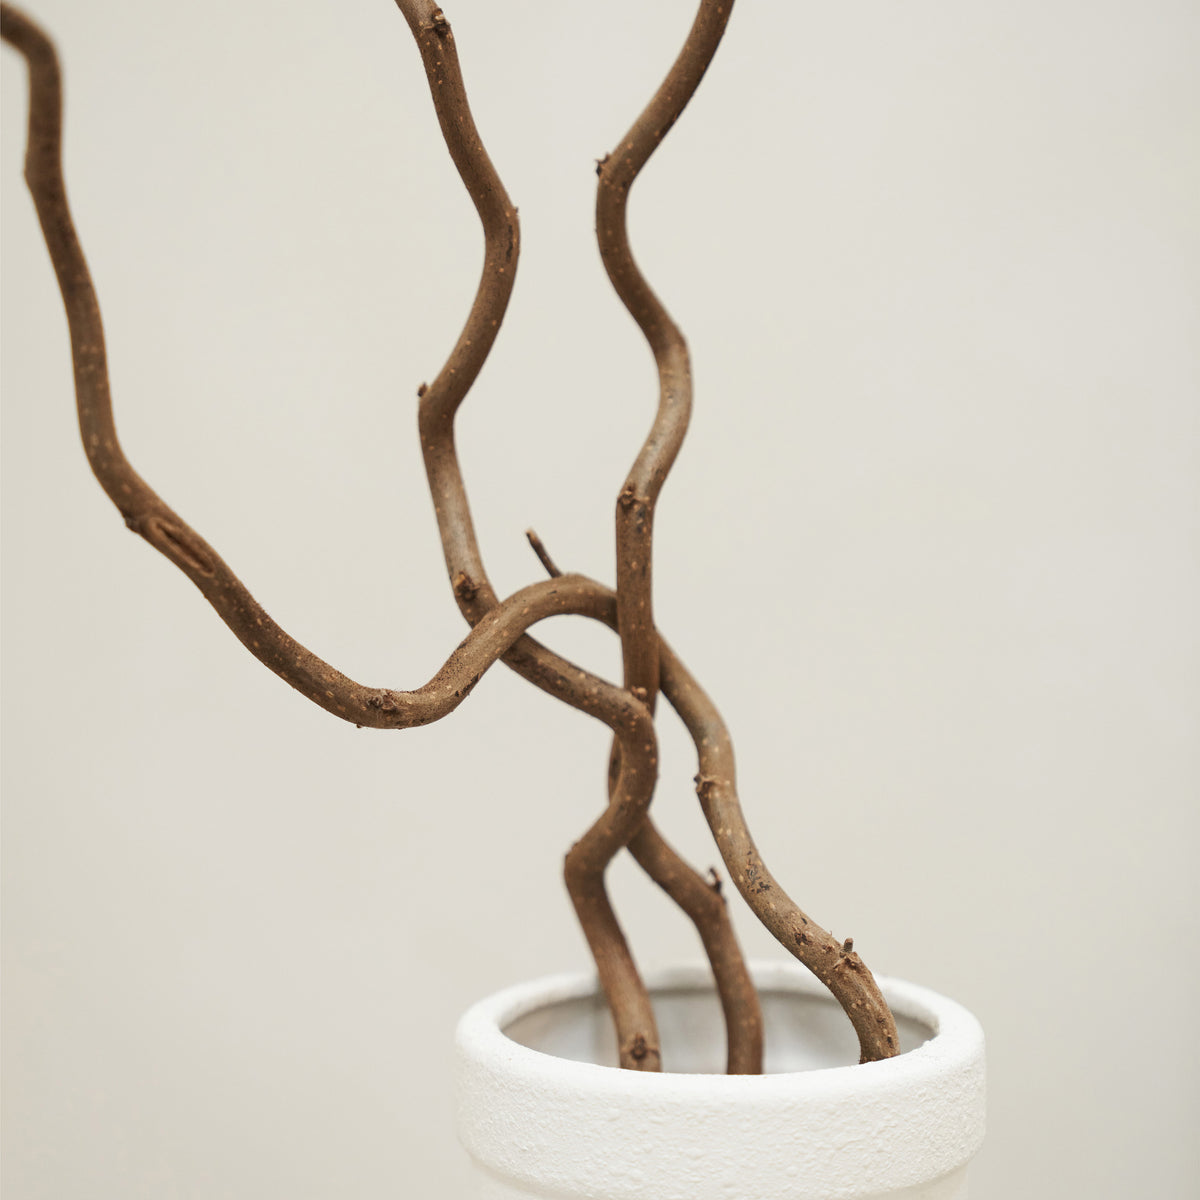 Three irregular branches climbing out of a vase